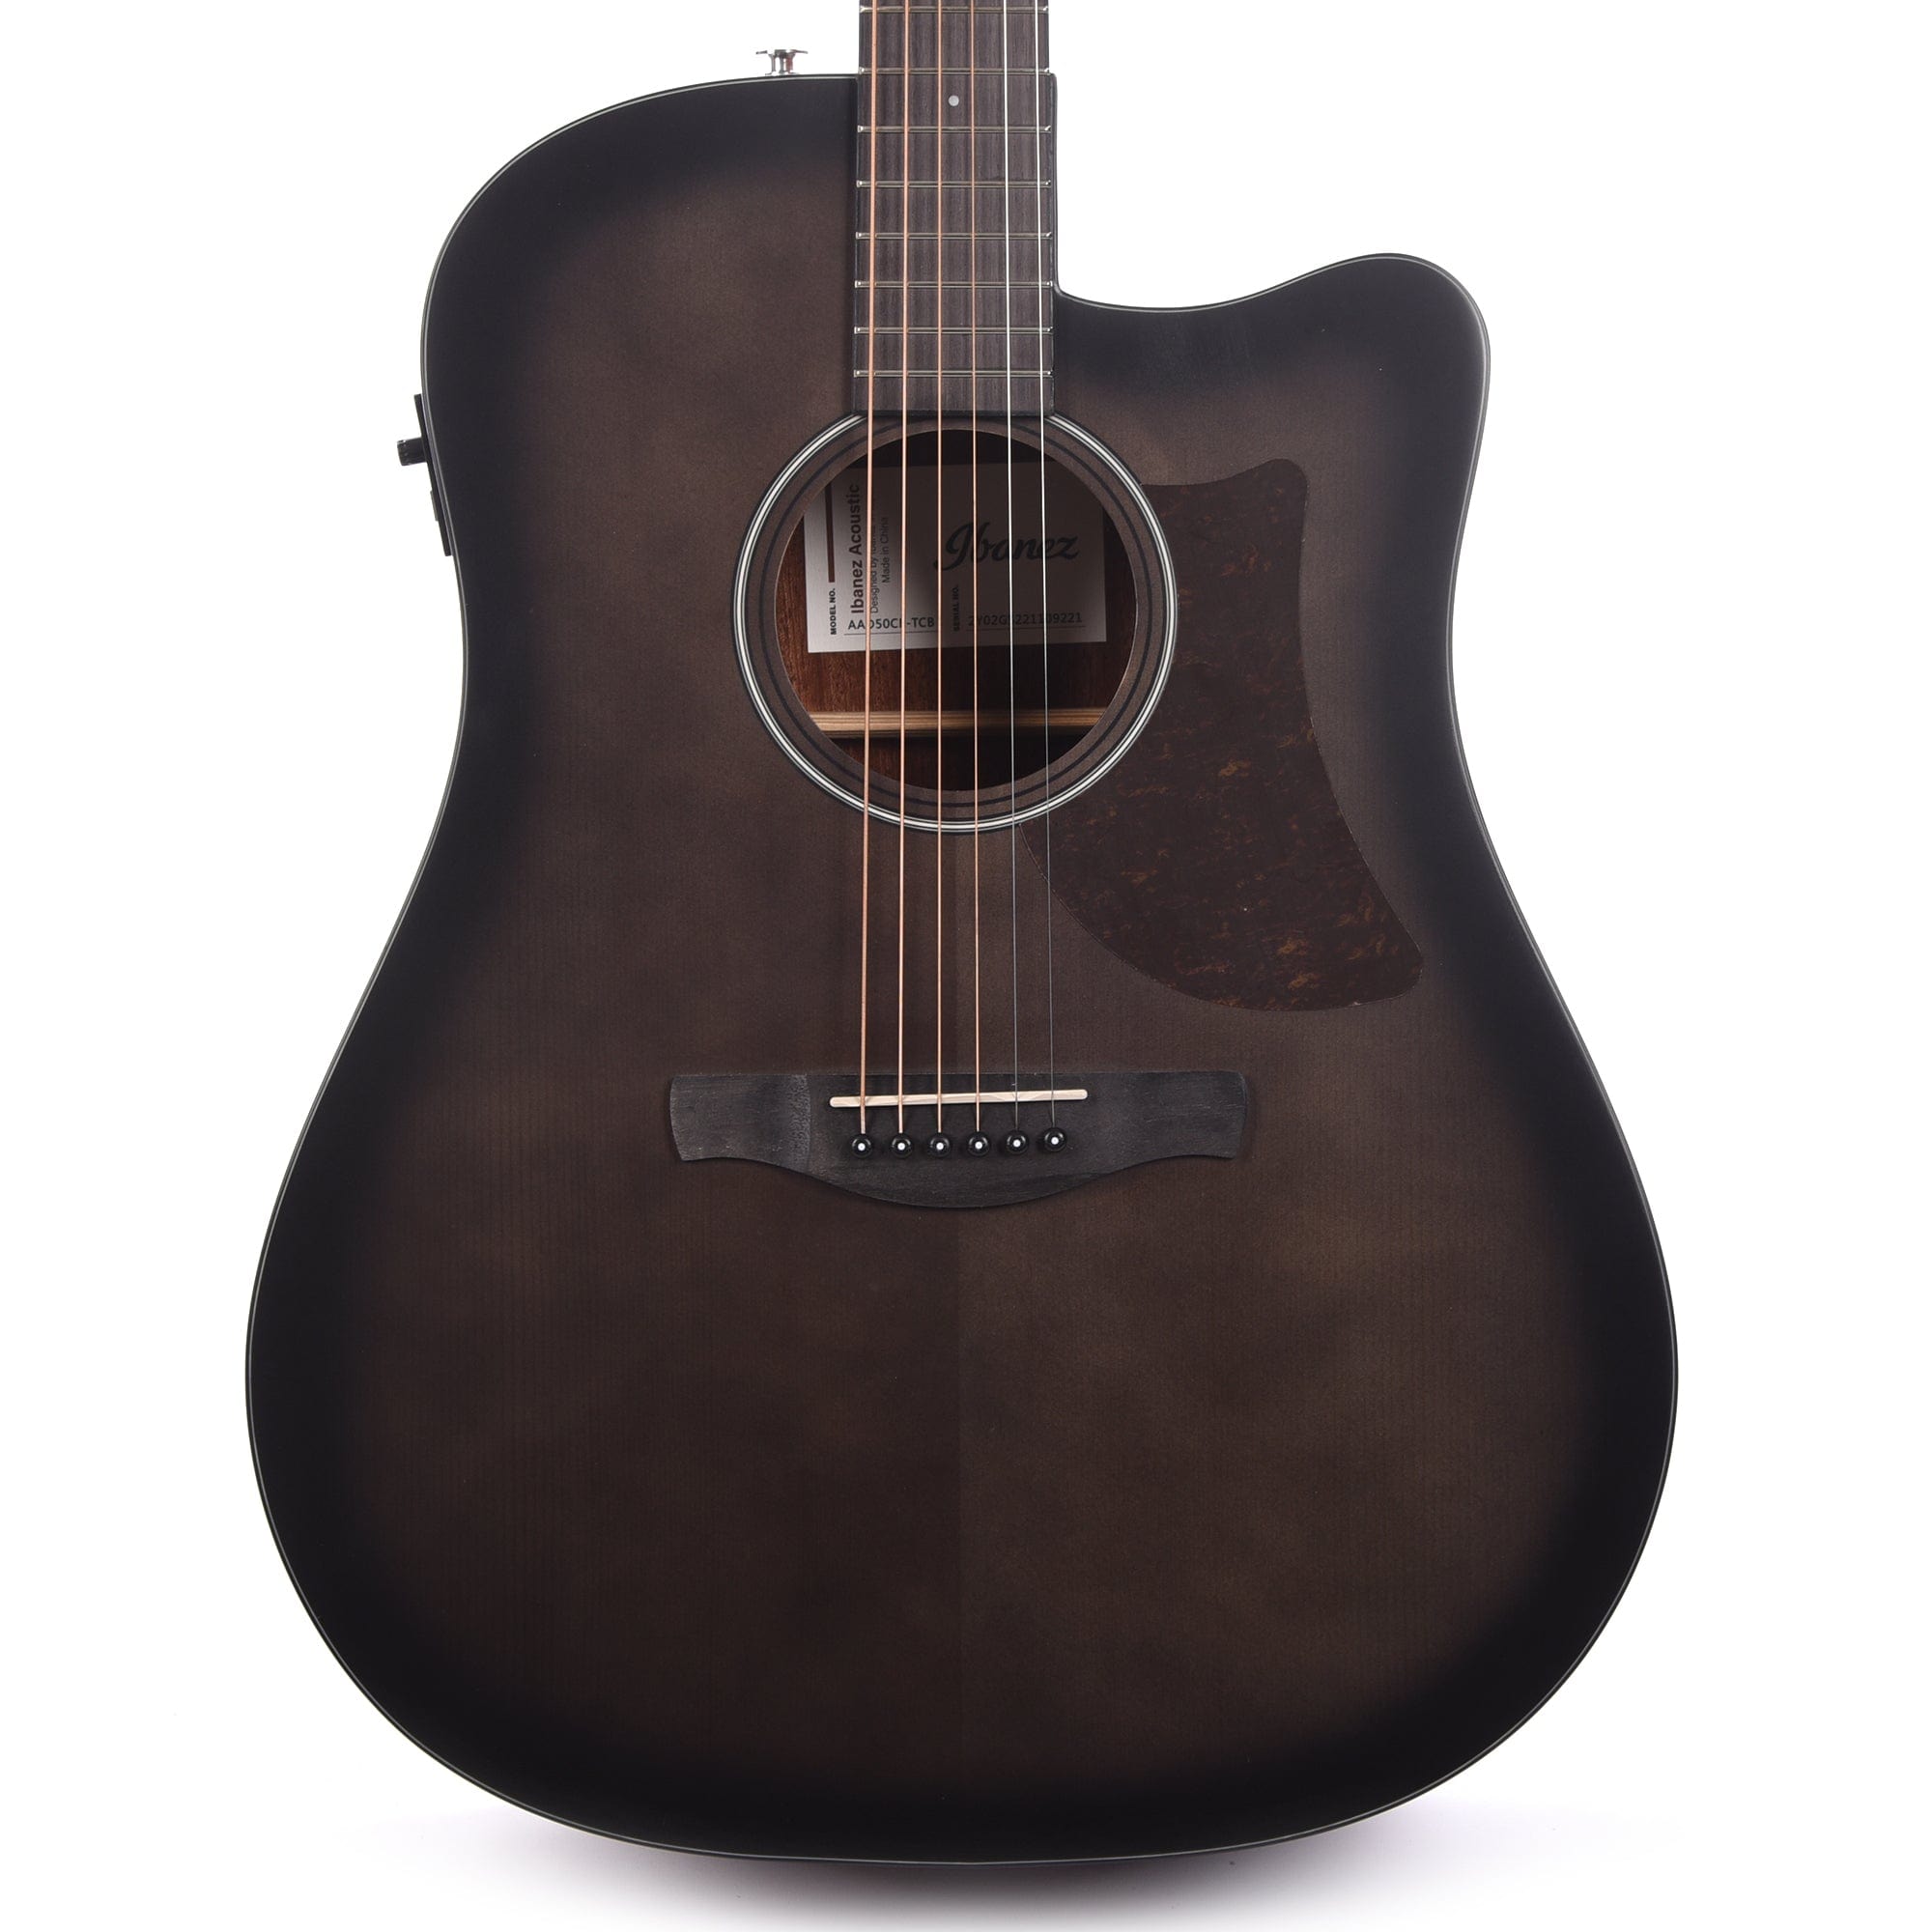 Ibanez AAD50CETCB Acoustic Guitar Transparent Charcoal Burst Low Gloss Acoustic Guitars / Dreadnought